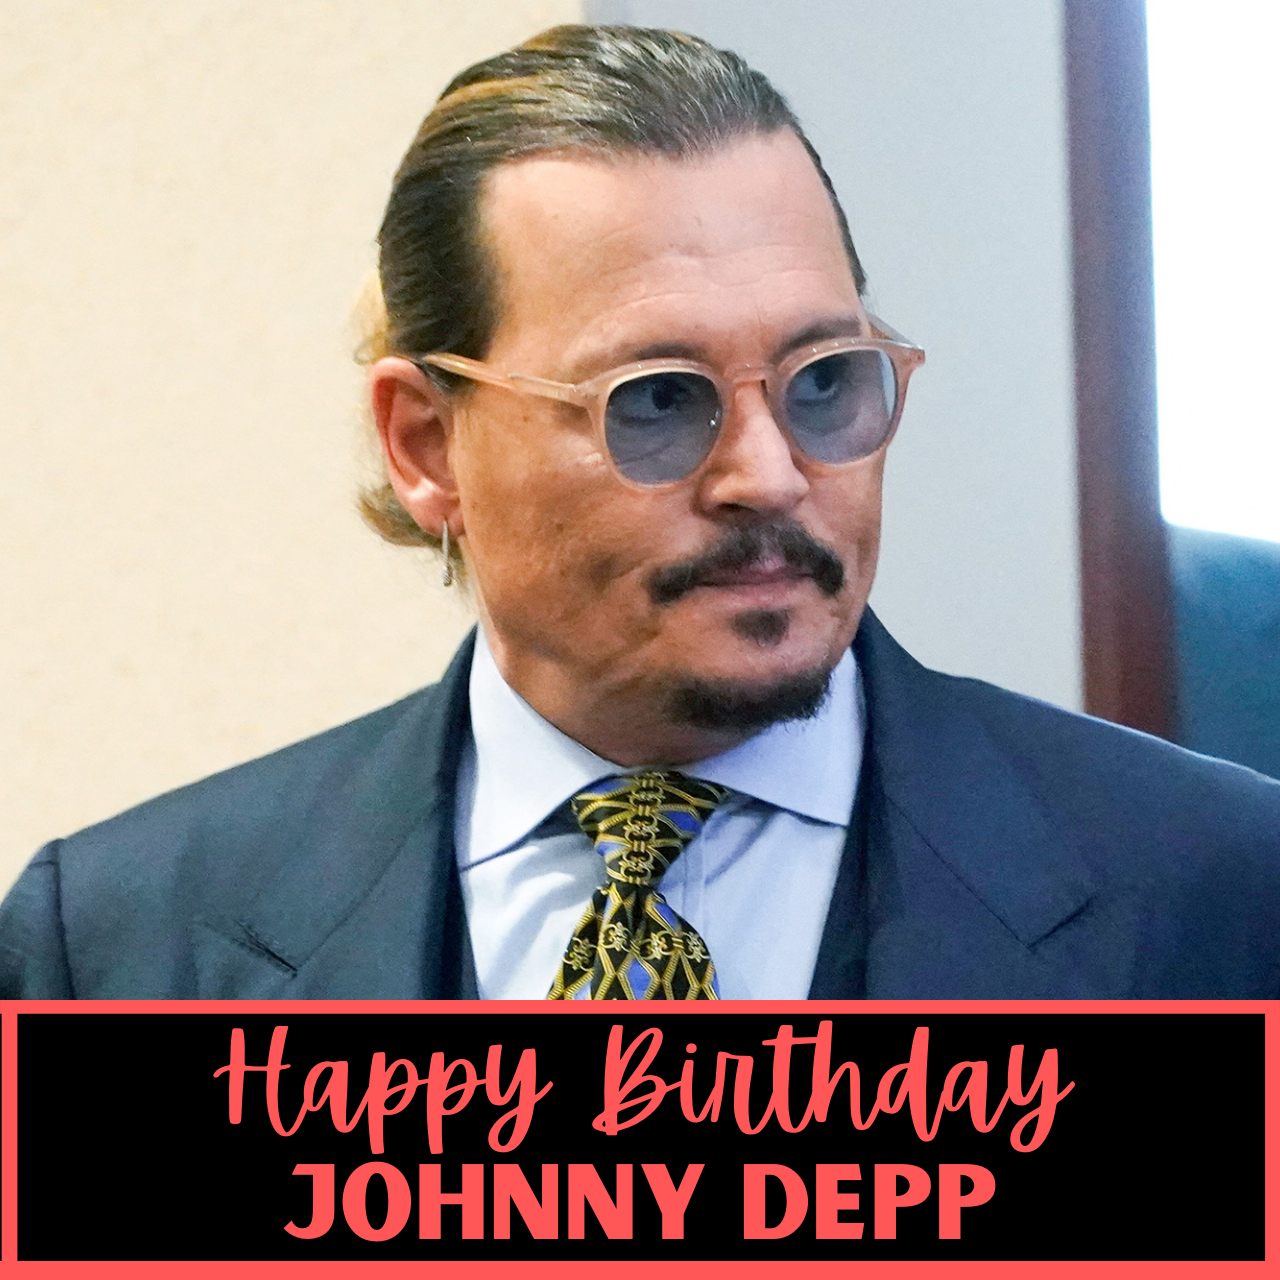 Happy Birthday Johnny Depp: Wishes, Images, Quotes, Posters, Greetings, Messages, To greet ''Johnny'